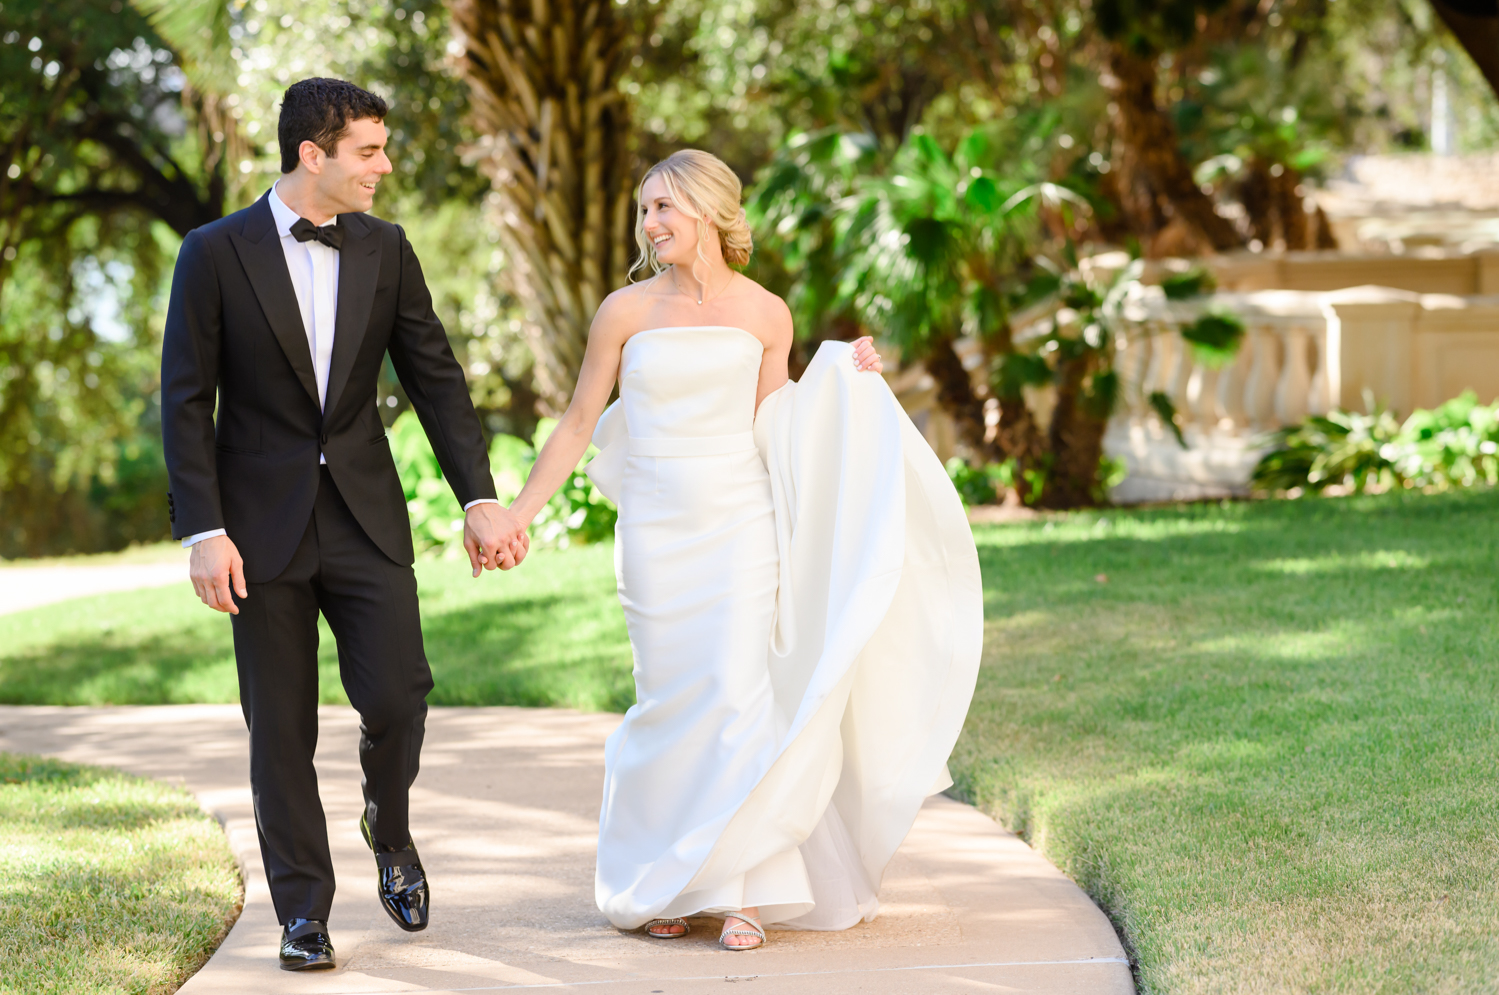 The bride and groom hold hands and walk together, laughing